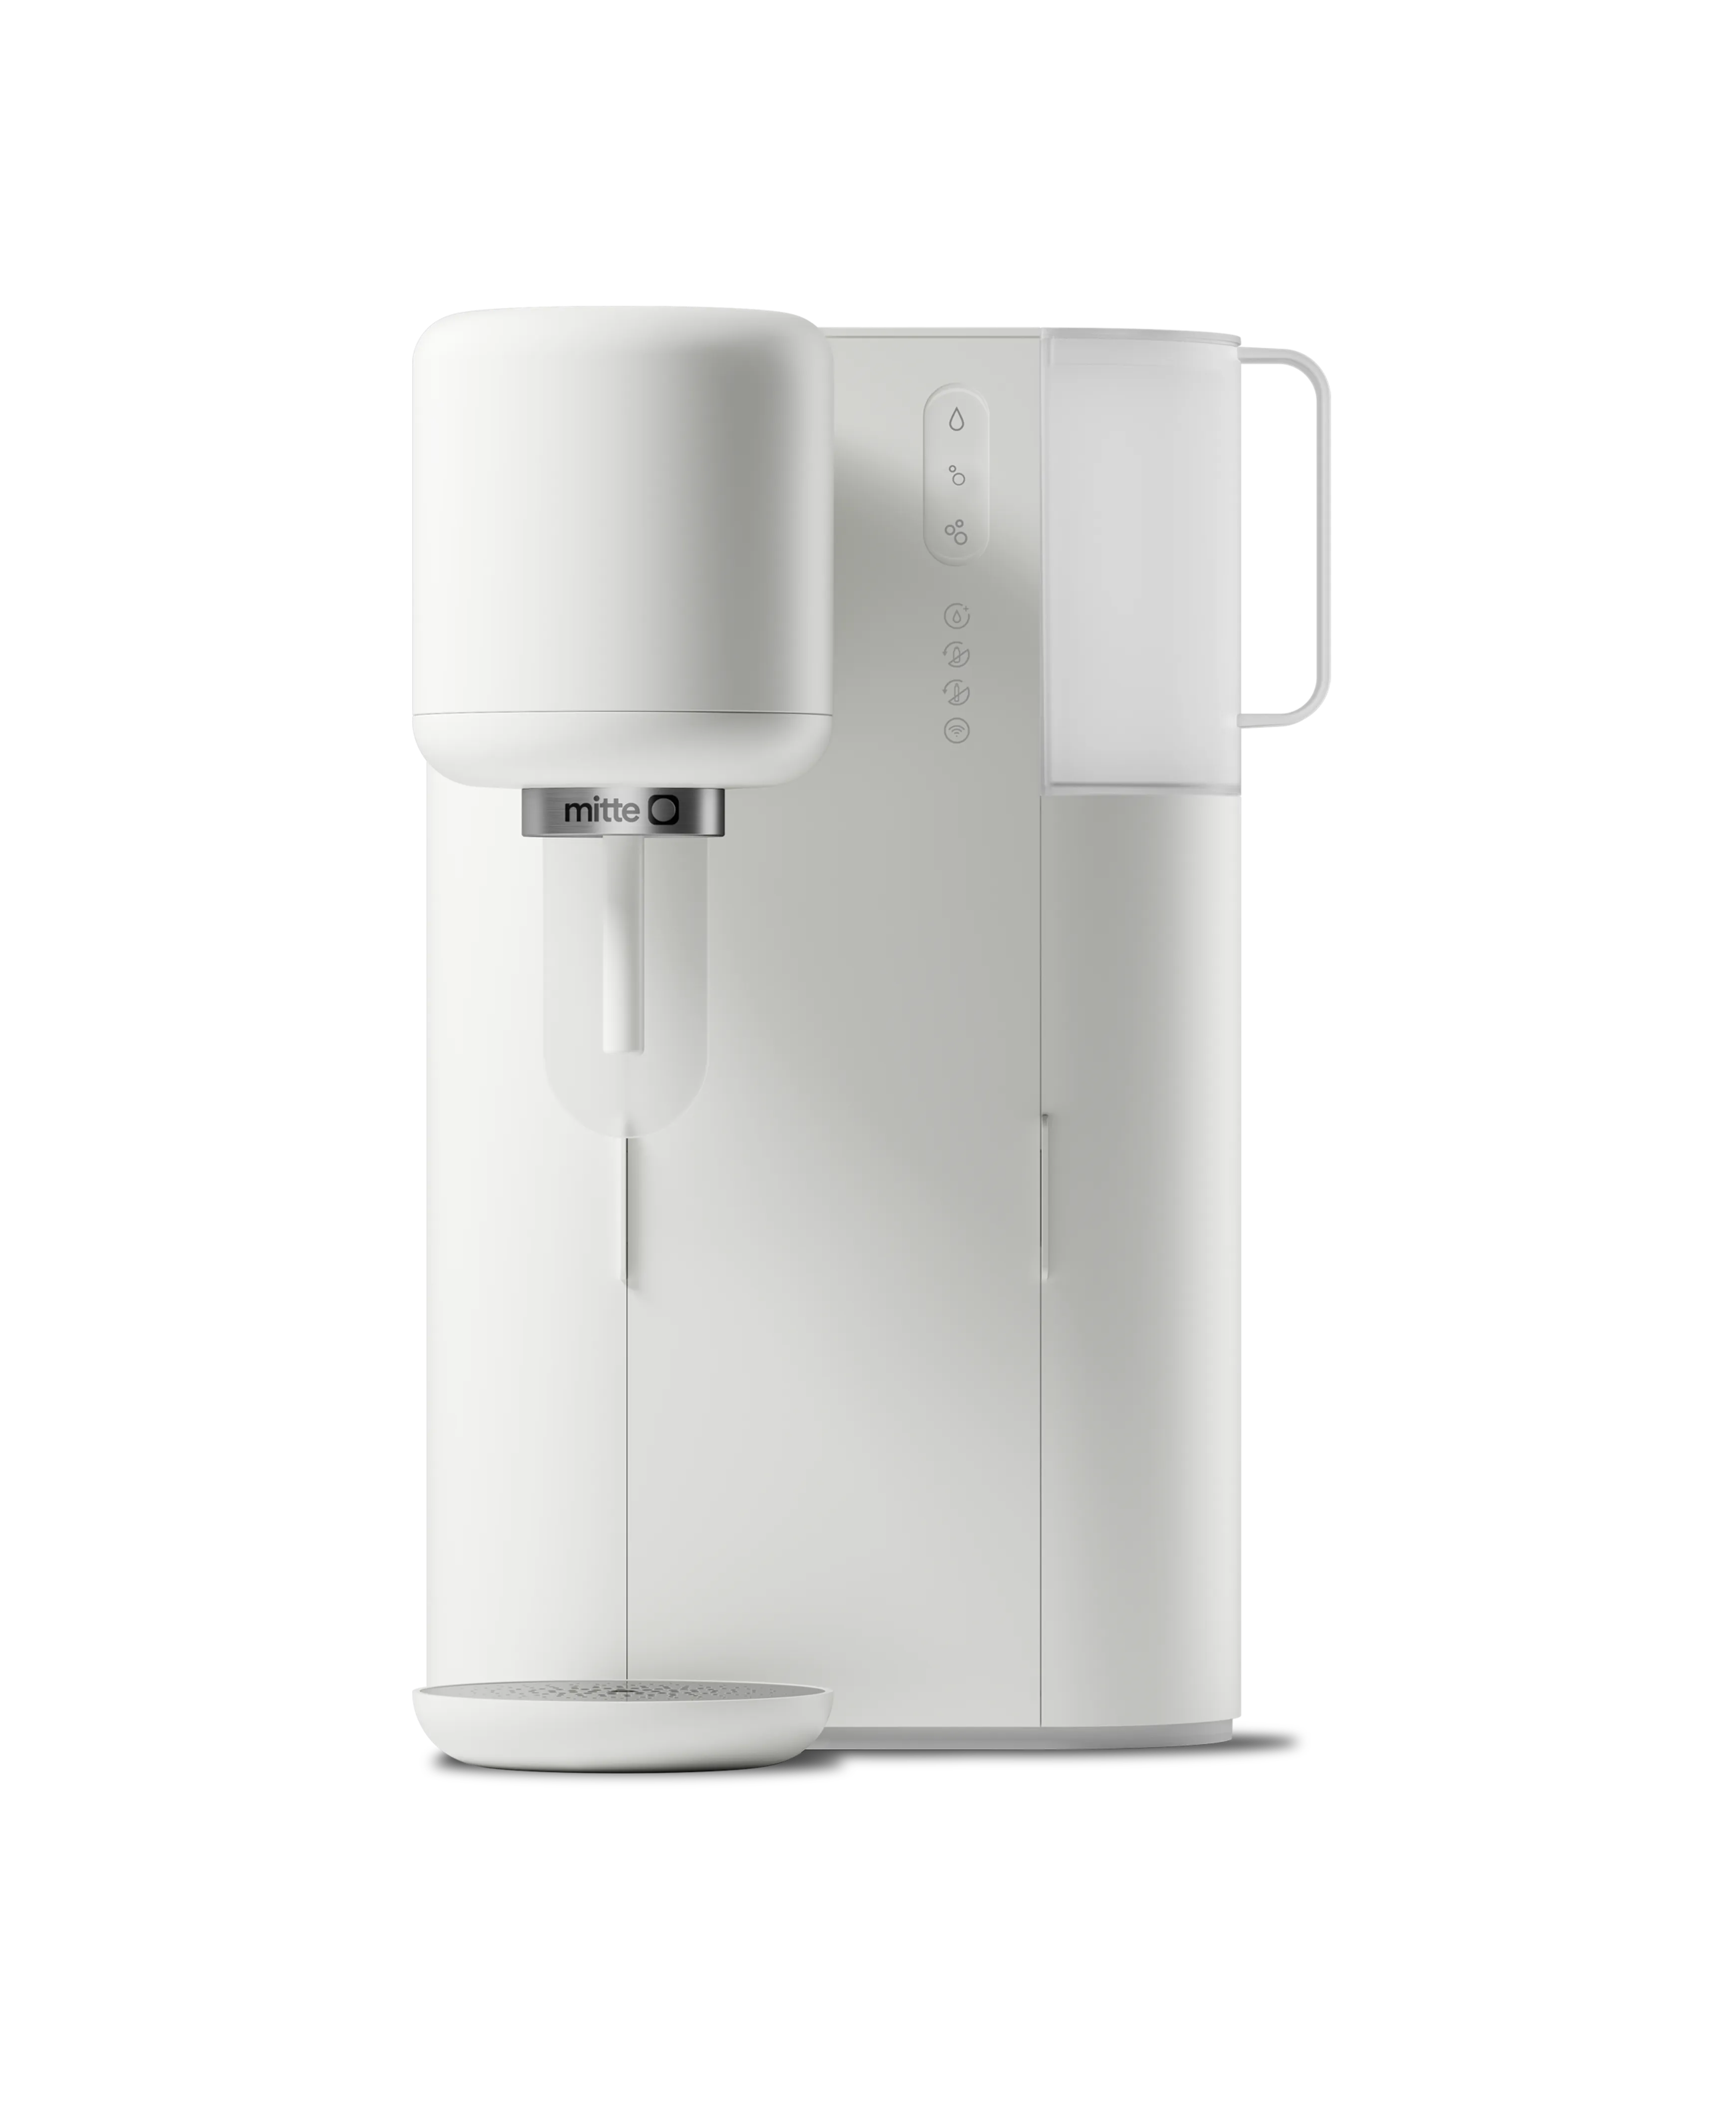 The Mitte water purifier in front of a transparent background